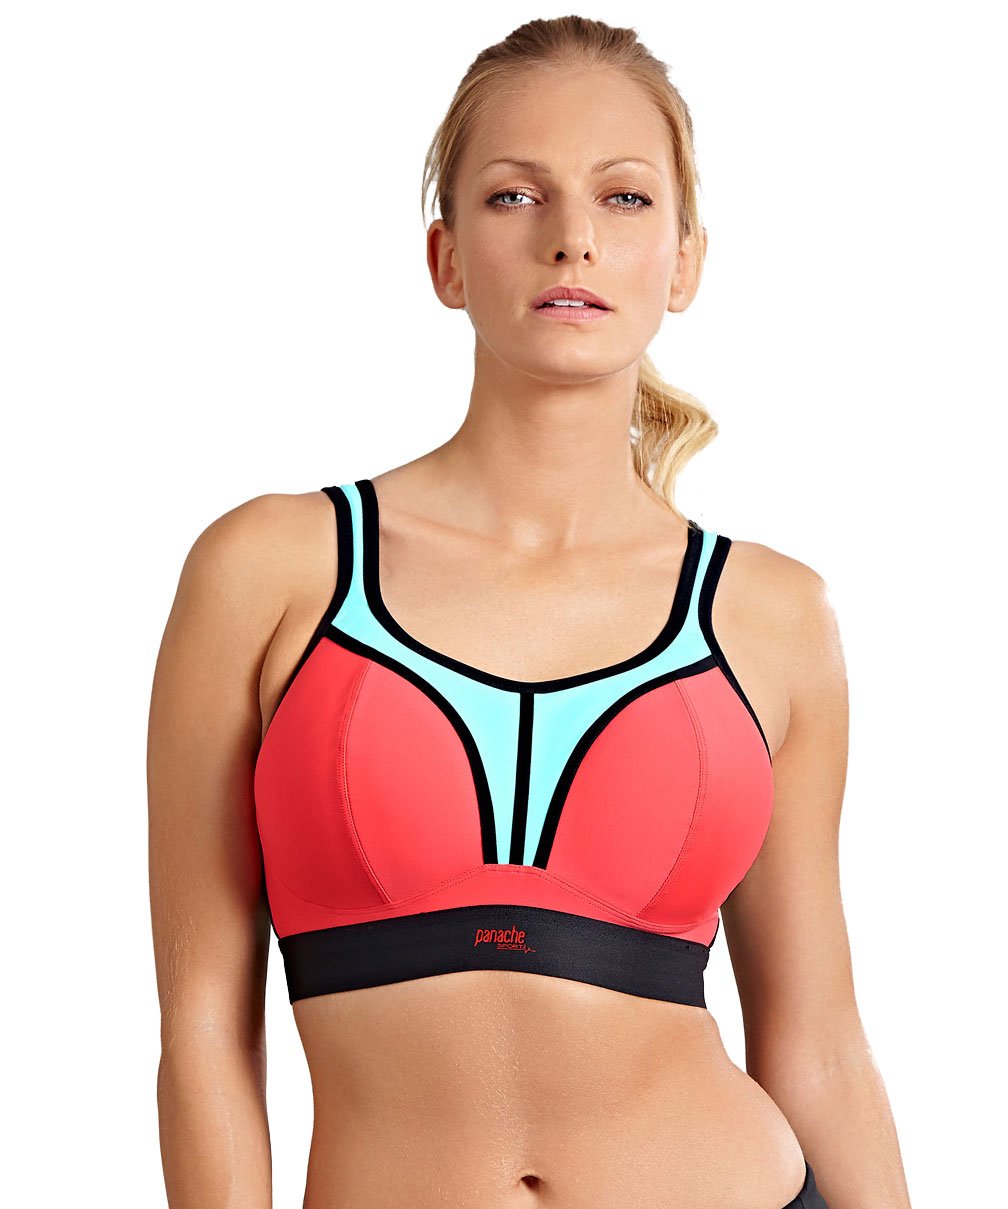 Panache Sports Wire Free 7341B - Sports Wirefree Bra Coral / Sky / 8G  Available at Illusions Lingerie